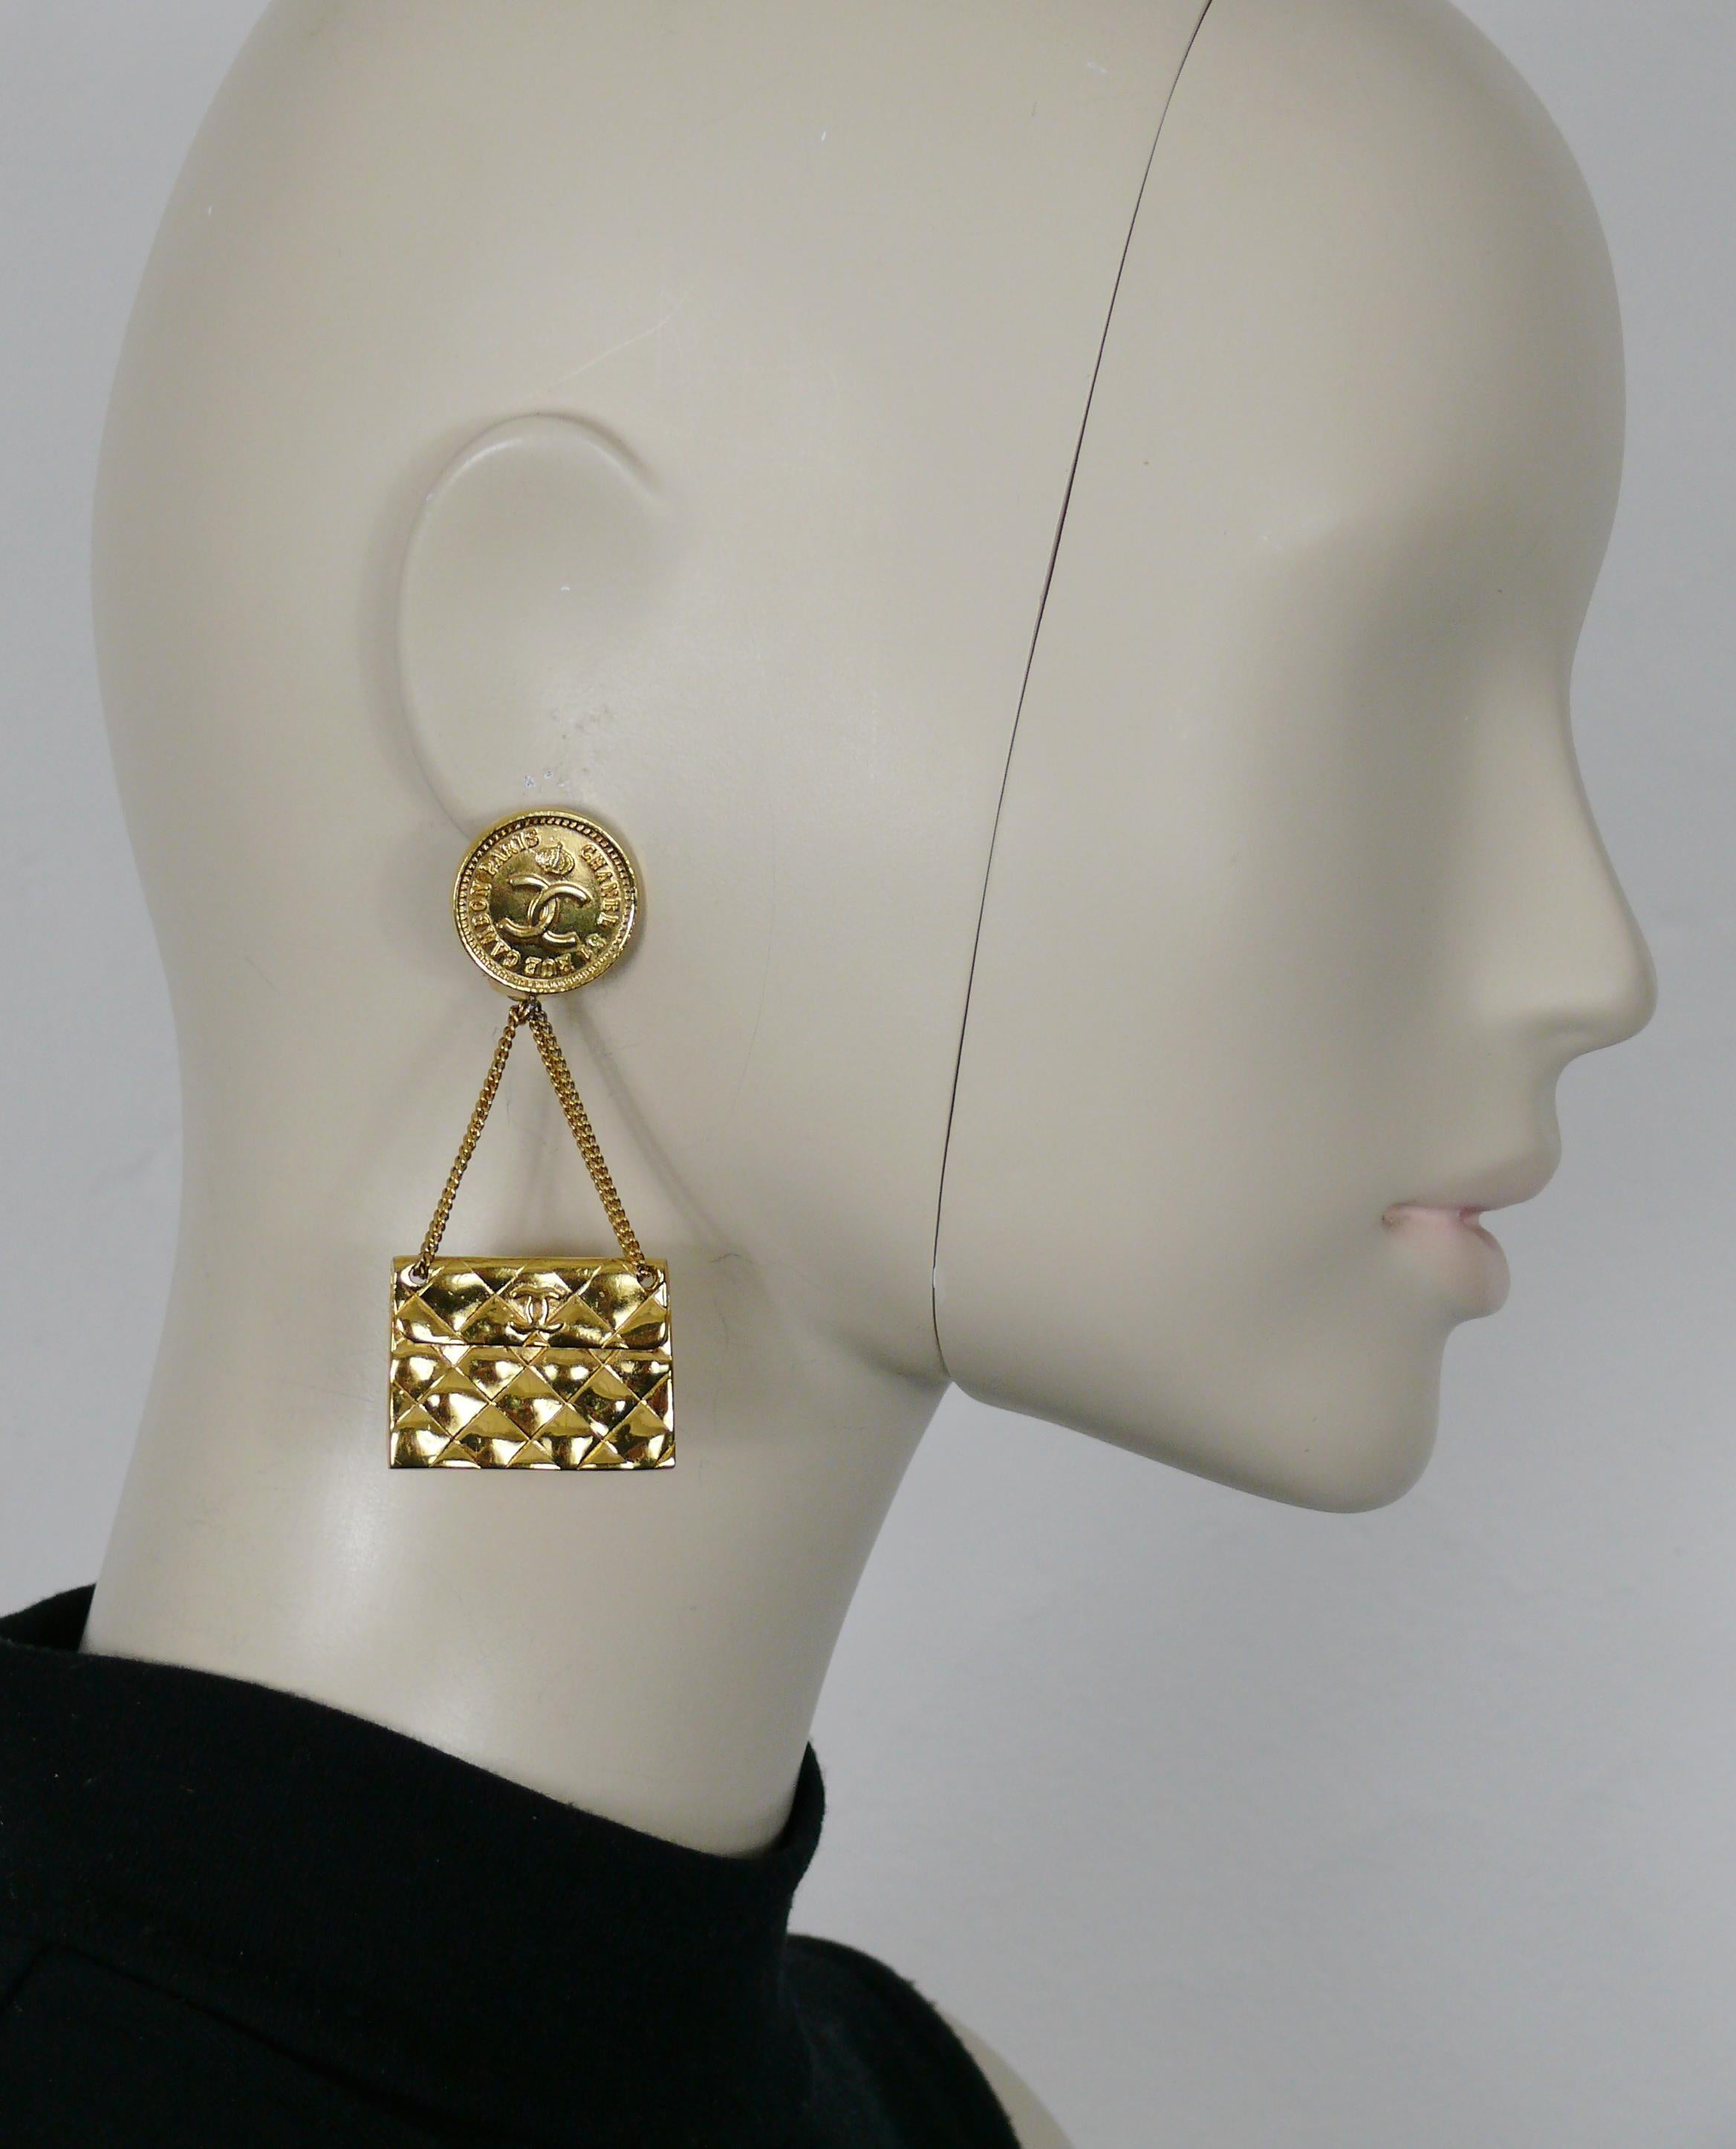 CHANEL vintage gold tone iconic dangling earrings (clip-on) featuring quilted flab bag topped by a crowned CC logo coin.

Embossed CHANEL.

Indicative measurements : height approx. 7.6 cm (2.99 inches) / max. width approx. 3.3 cm (1.30